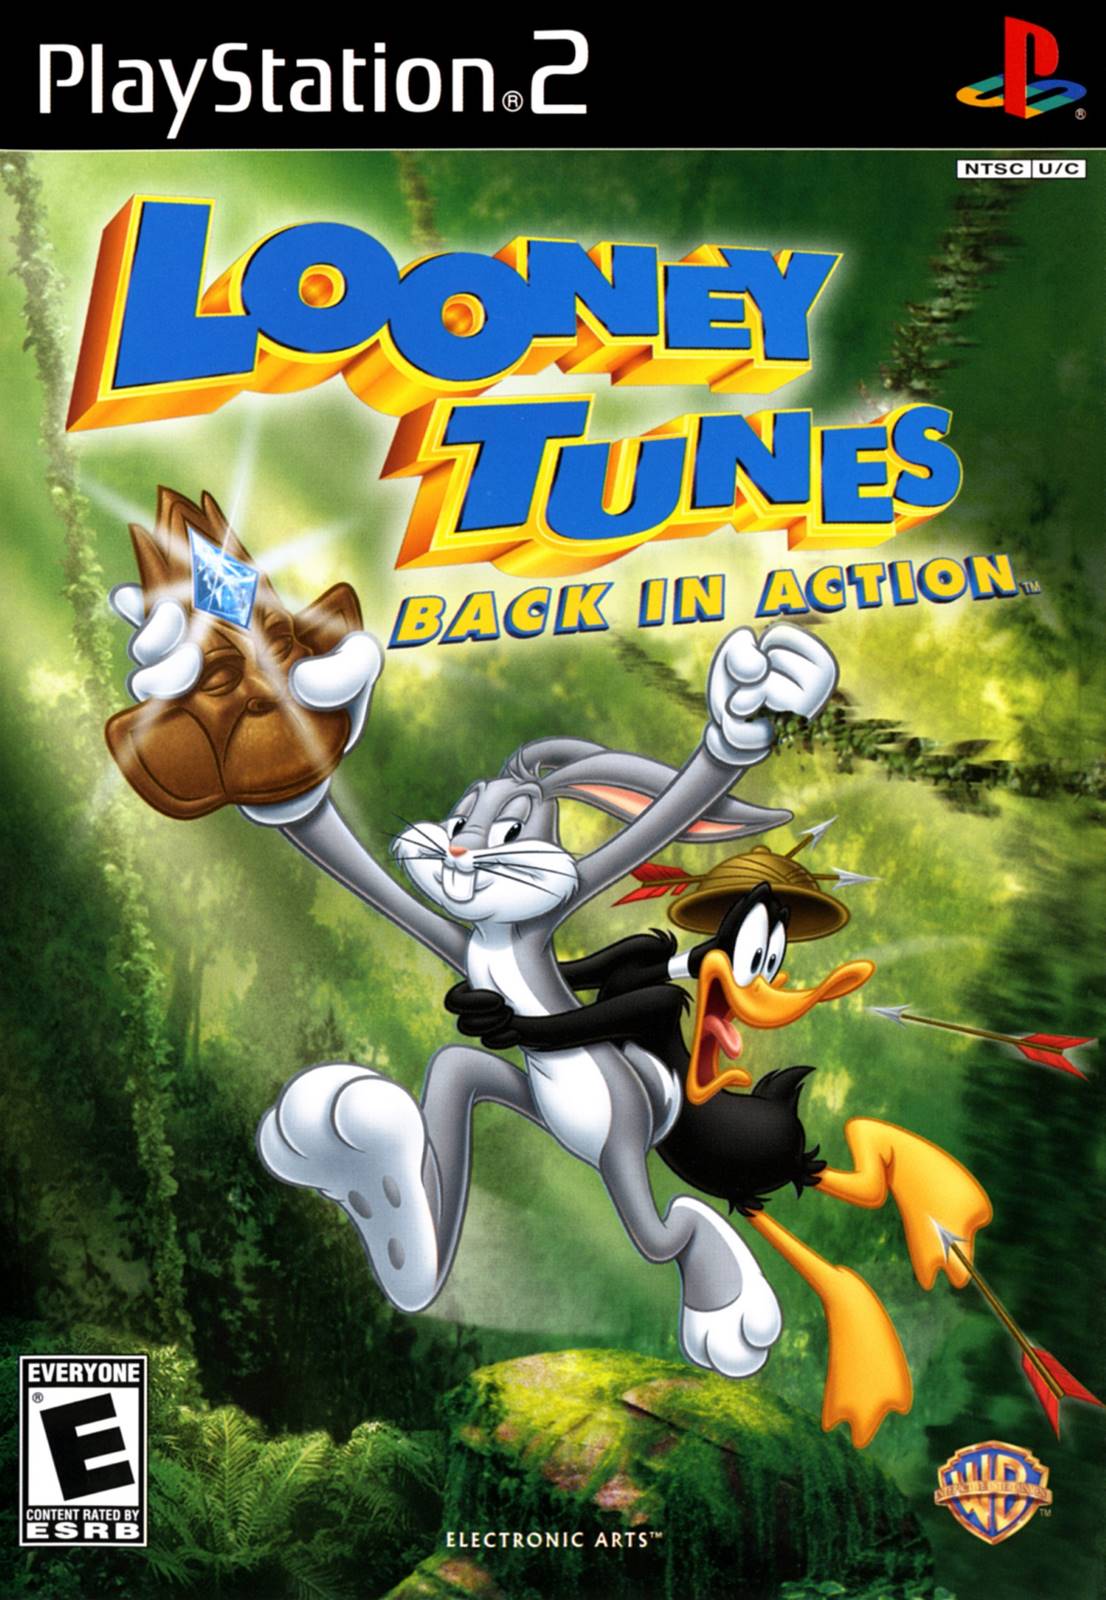 Looney tunes back in action full movie in hindi free download